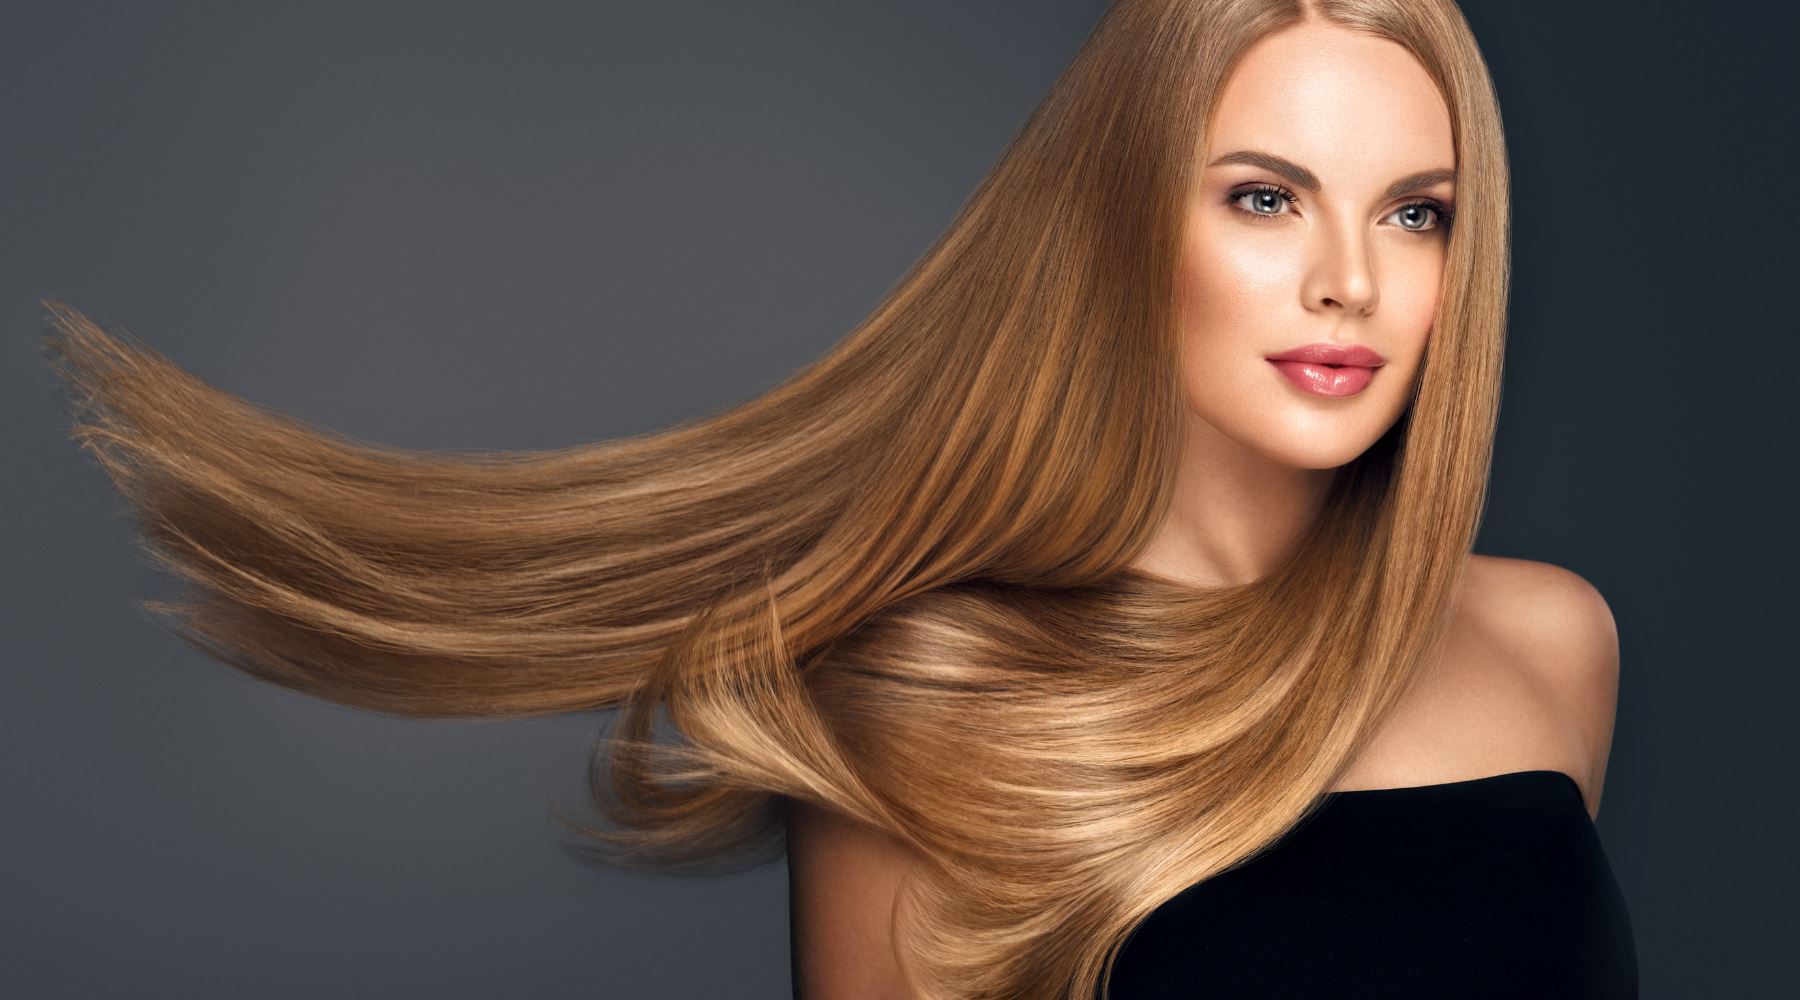 Keratin Treatment At Home or The Salon + Aftercare Tips